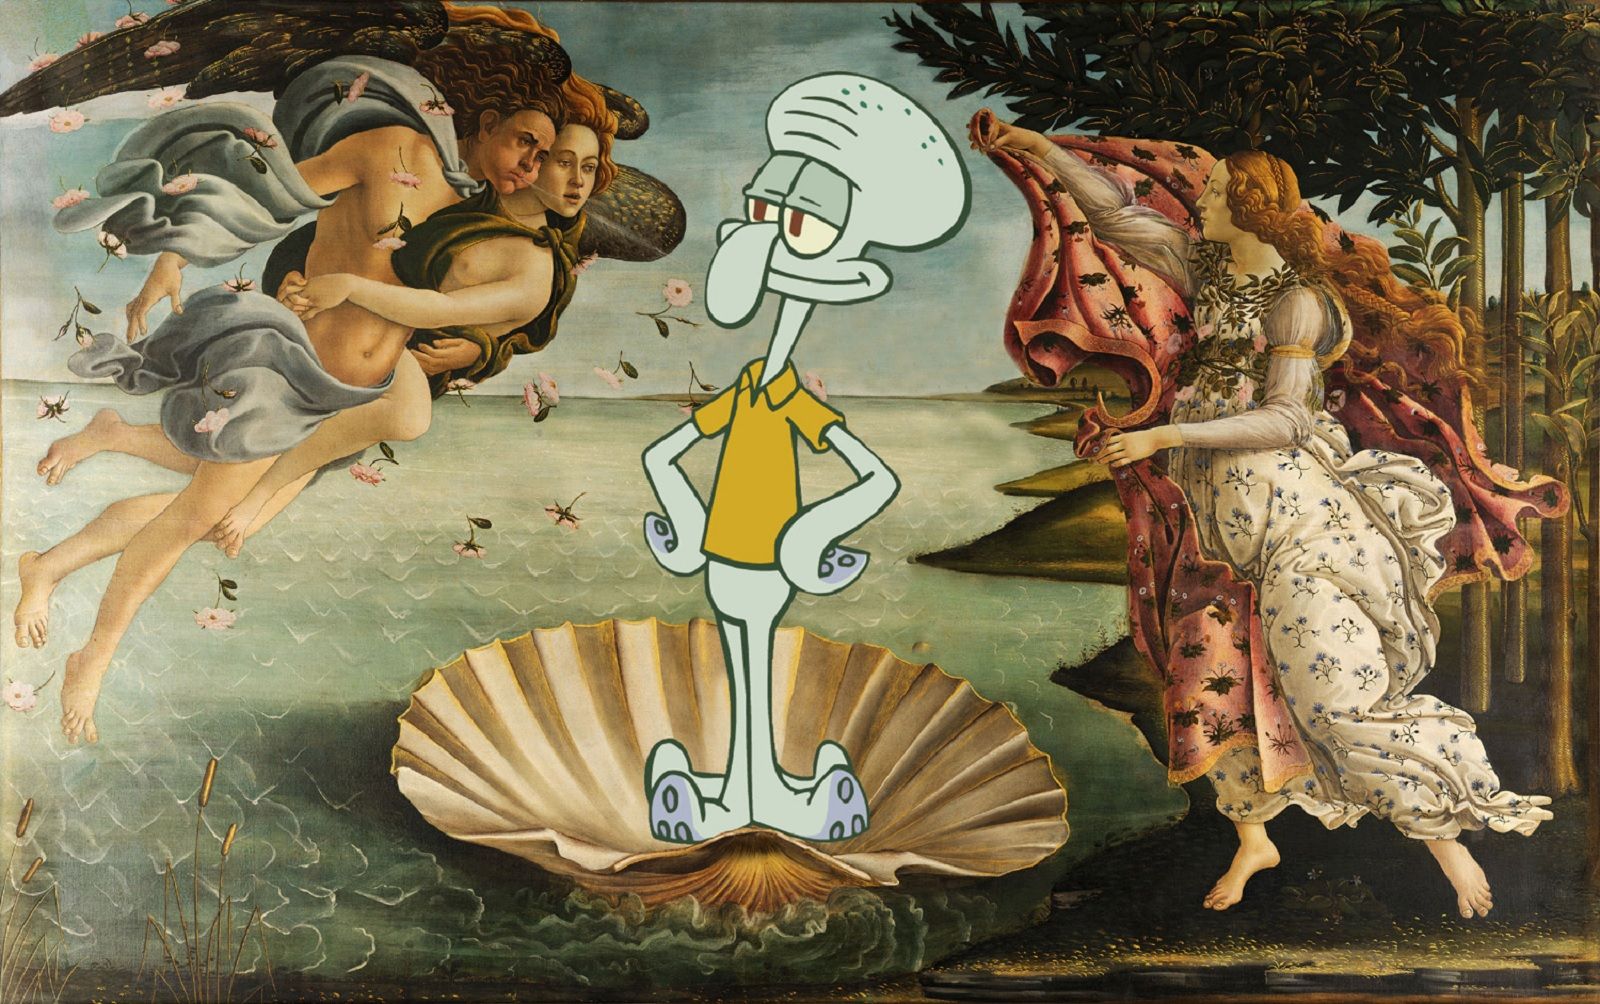 Amusing Images Of Cartoon Characters In Photoshopped Into Renaissance Paintings image 6